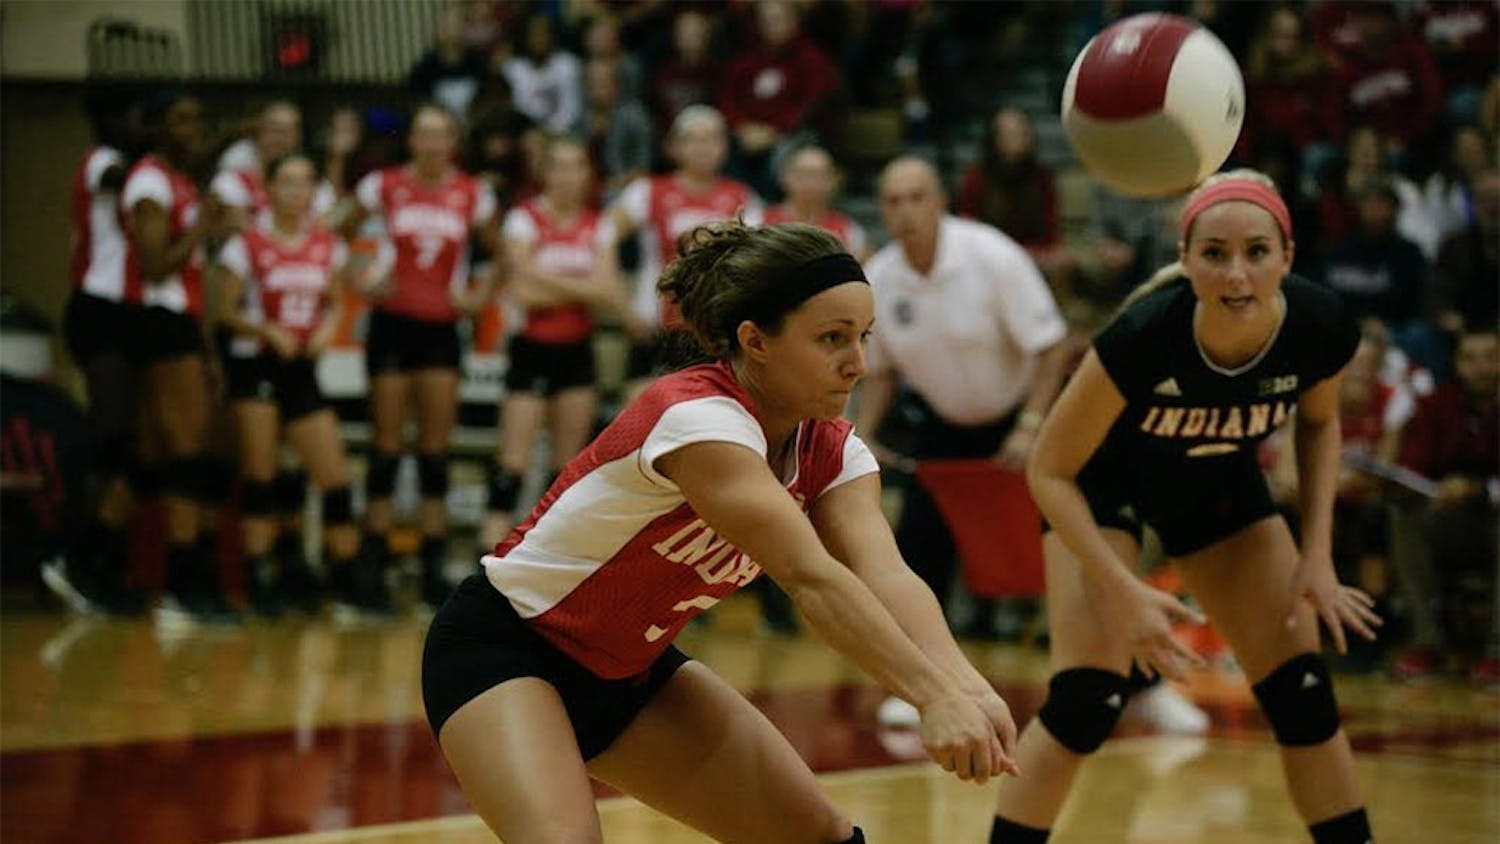 Senior defensive specialist Kyndall Merritt hits the ball during the game last Friday against Maryland. The Hoosiers played two games this weekend, defeating both Maryland and Rutgers 3-1. 